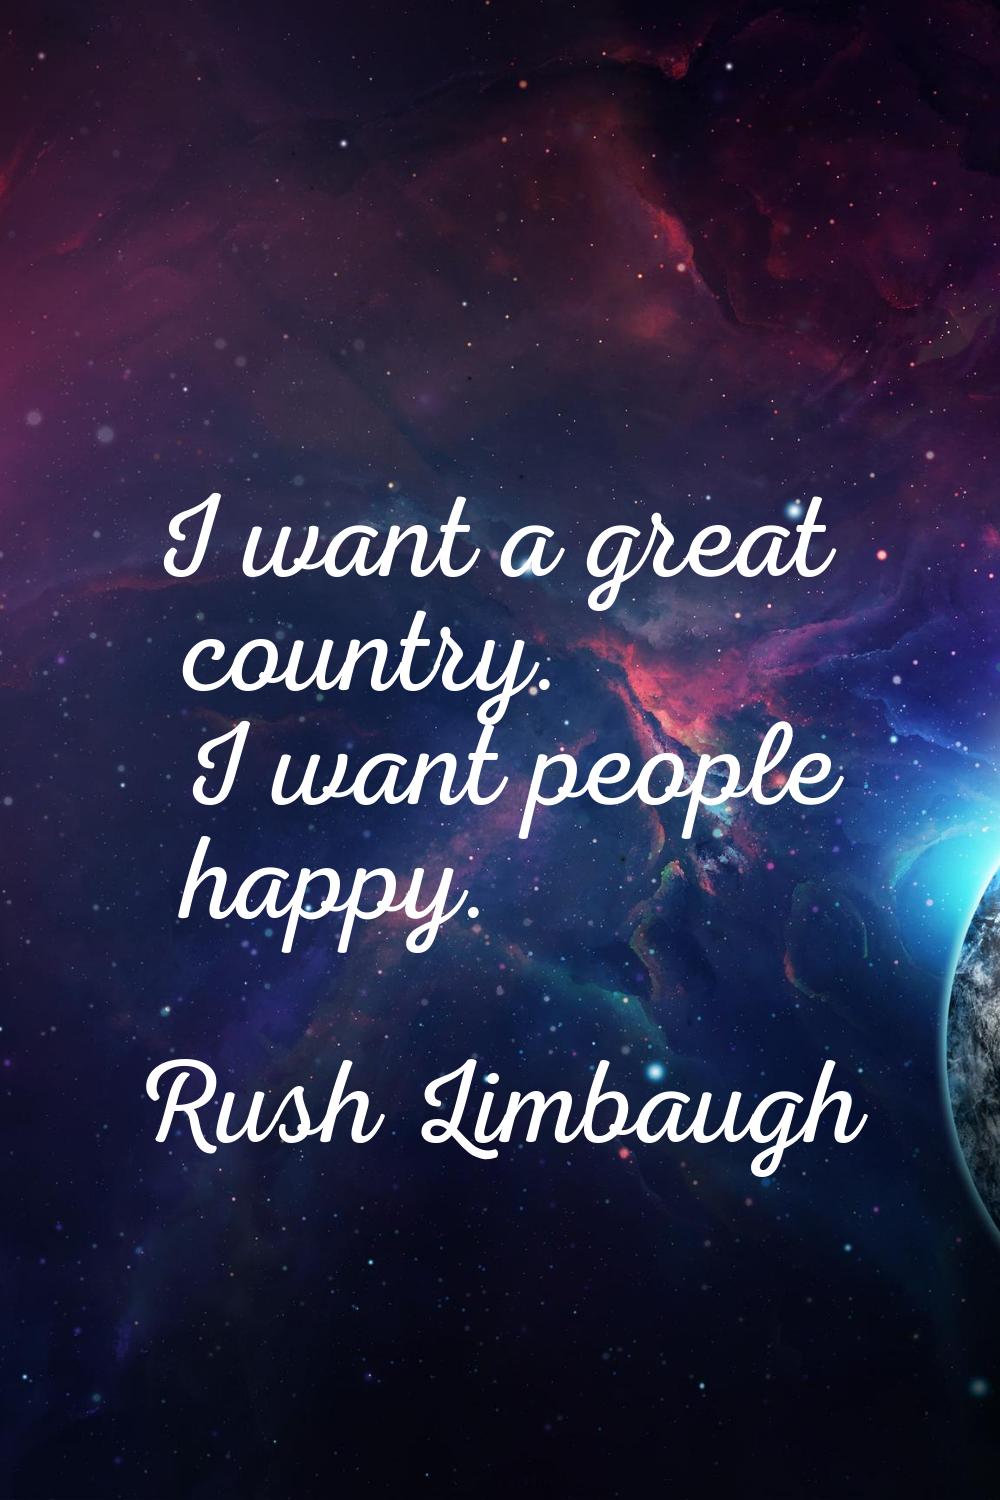 I want a great country. I want people happy.